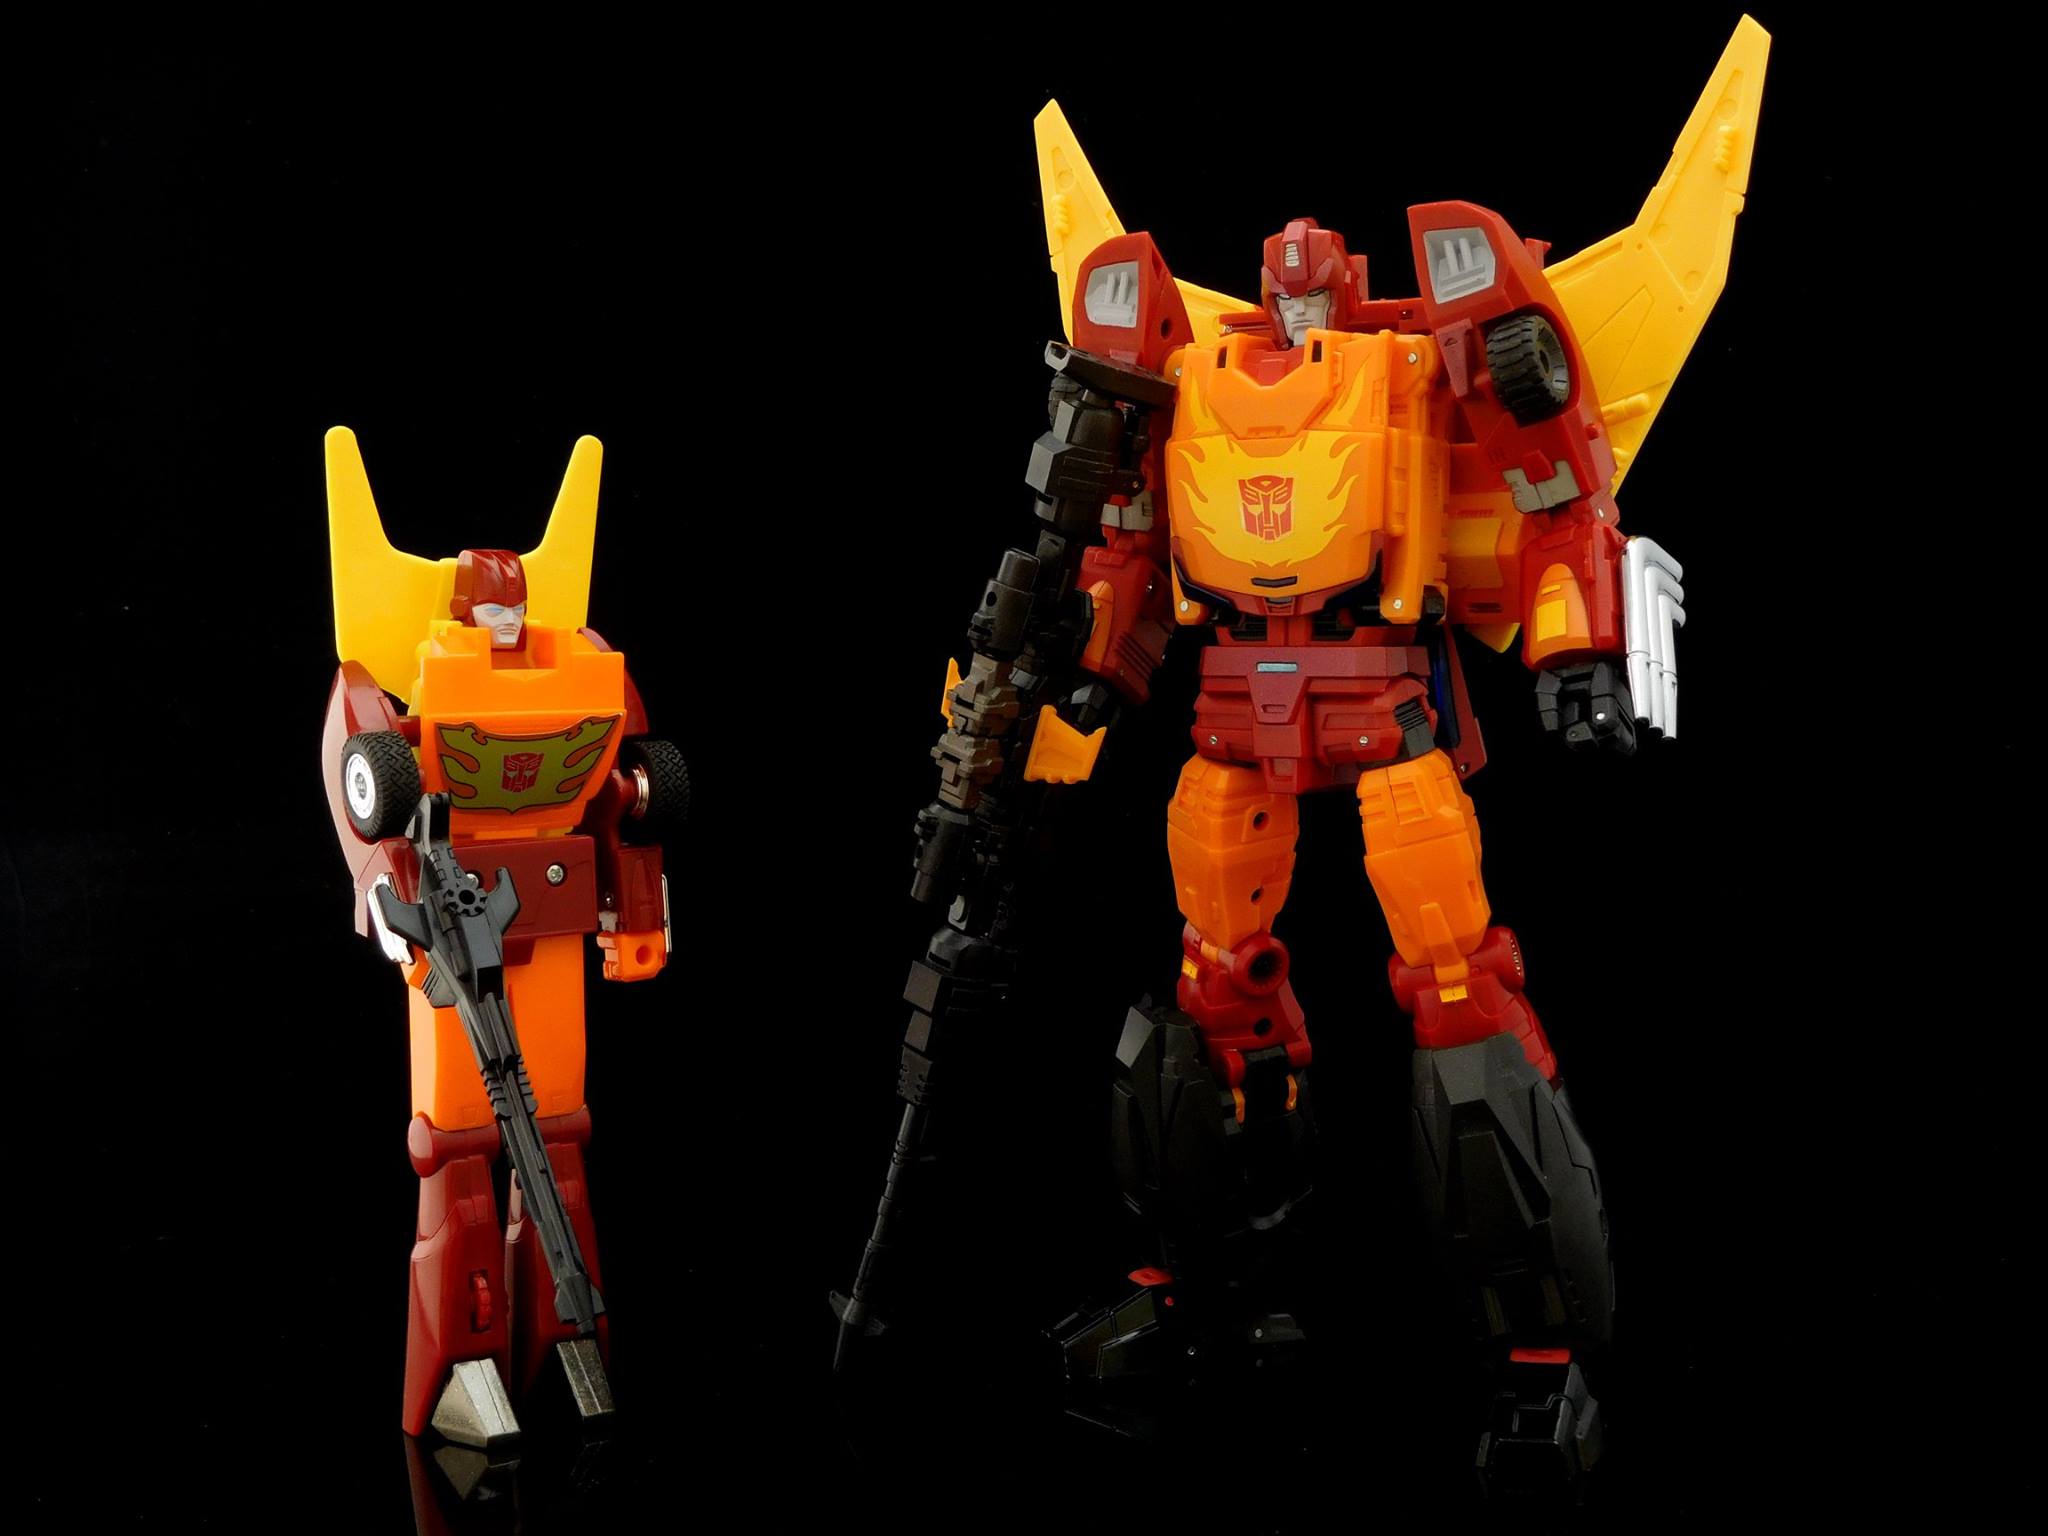 Generation 1 Rodimus Prime and DX9 Toys Carry in robot mode